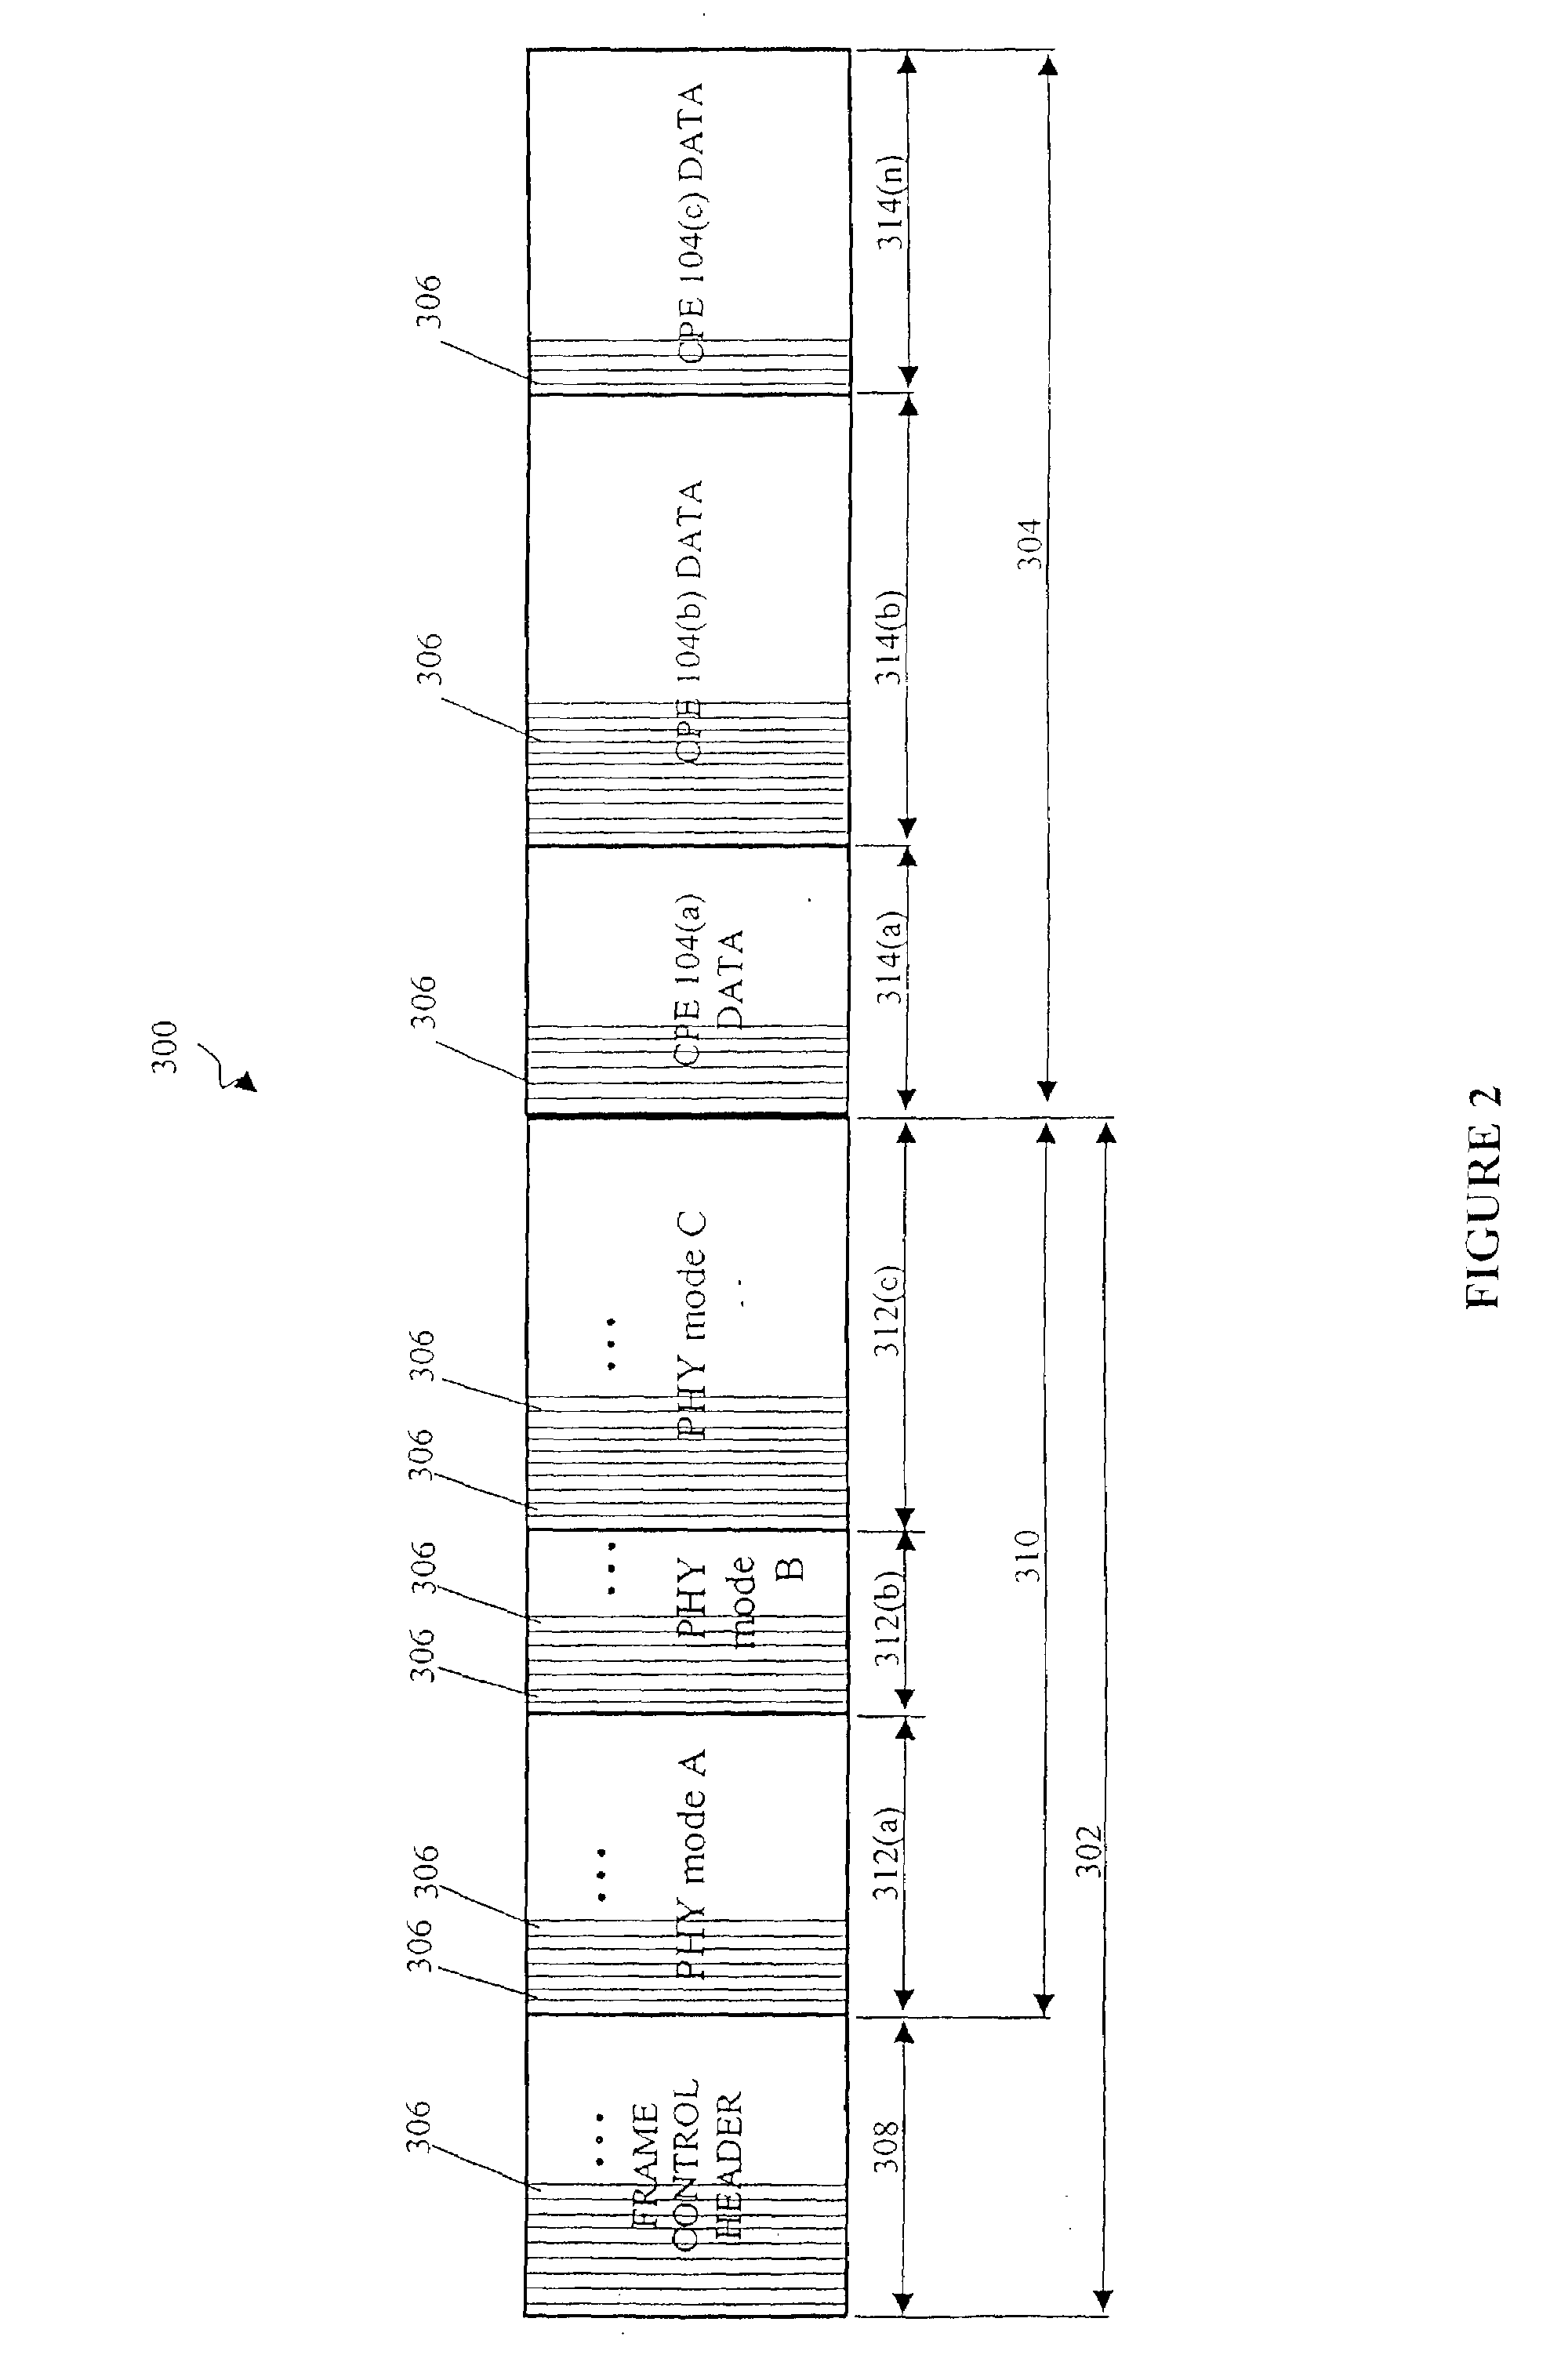 Scheduling method and system for communication systems that offer multiple classes of service